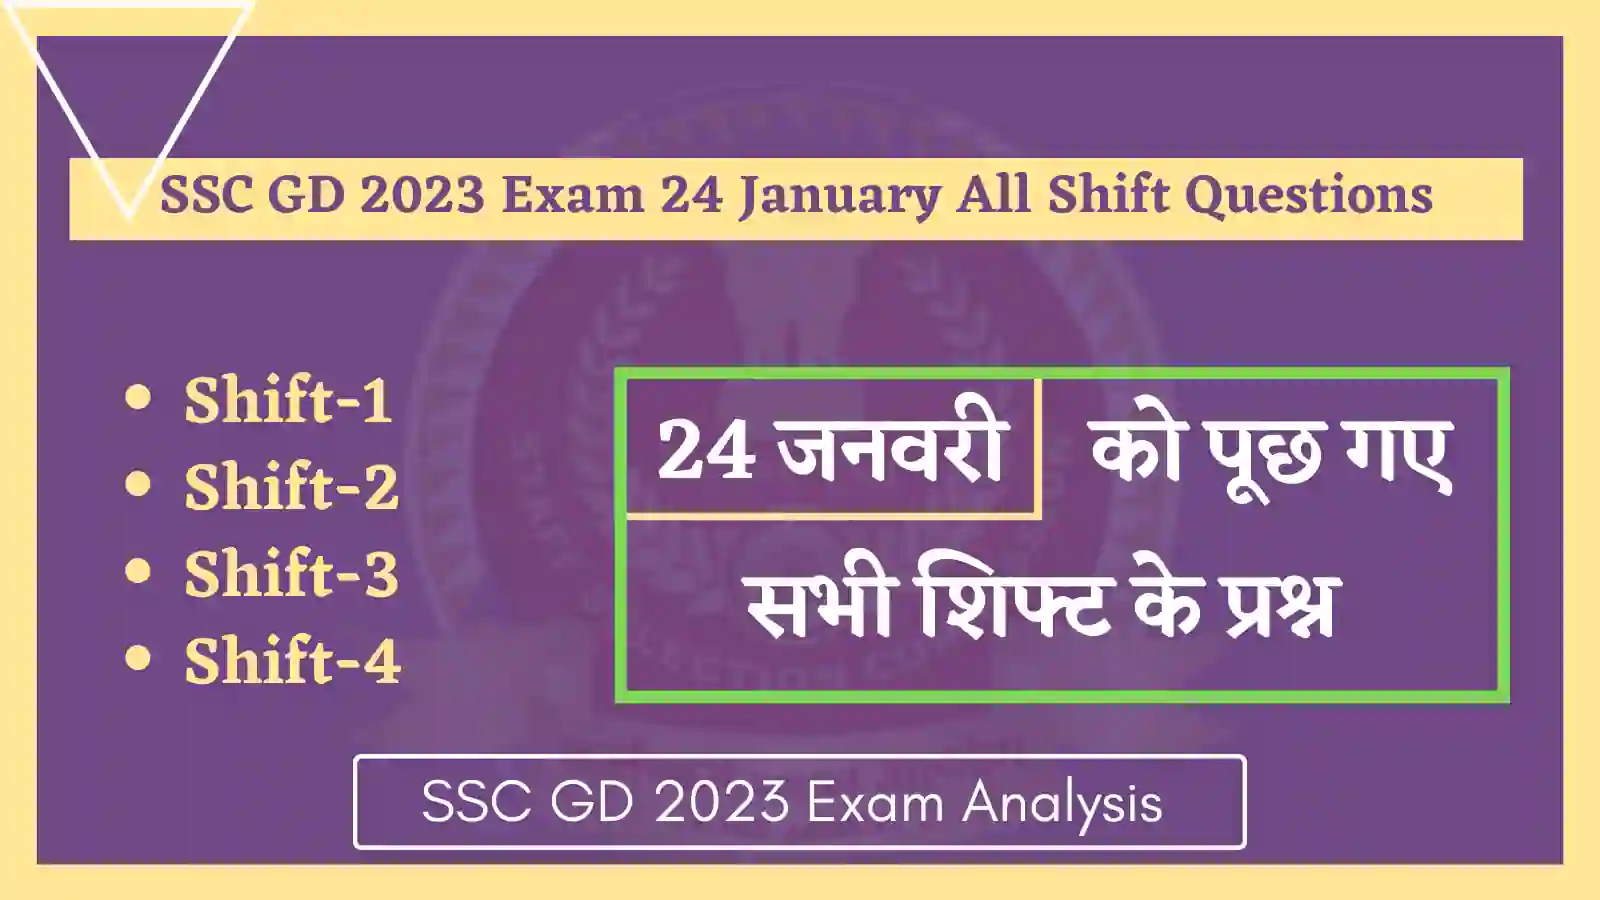 SSC GD 2023 Exam 24 January All Shift Questions